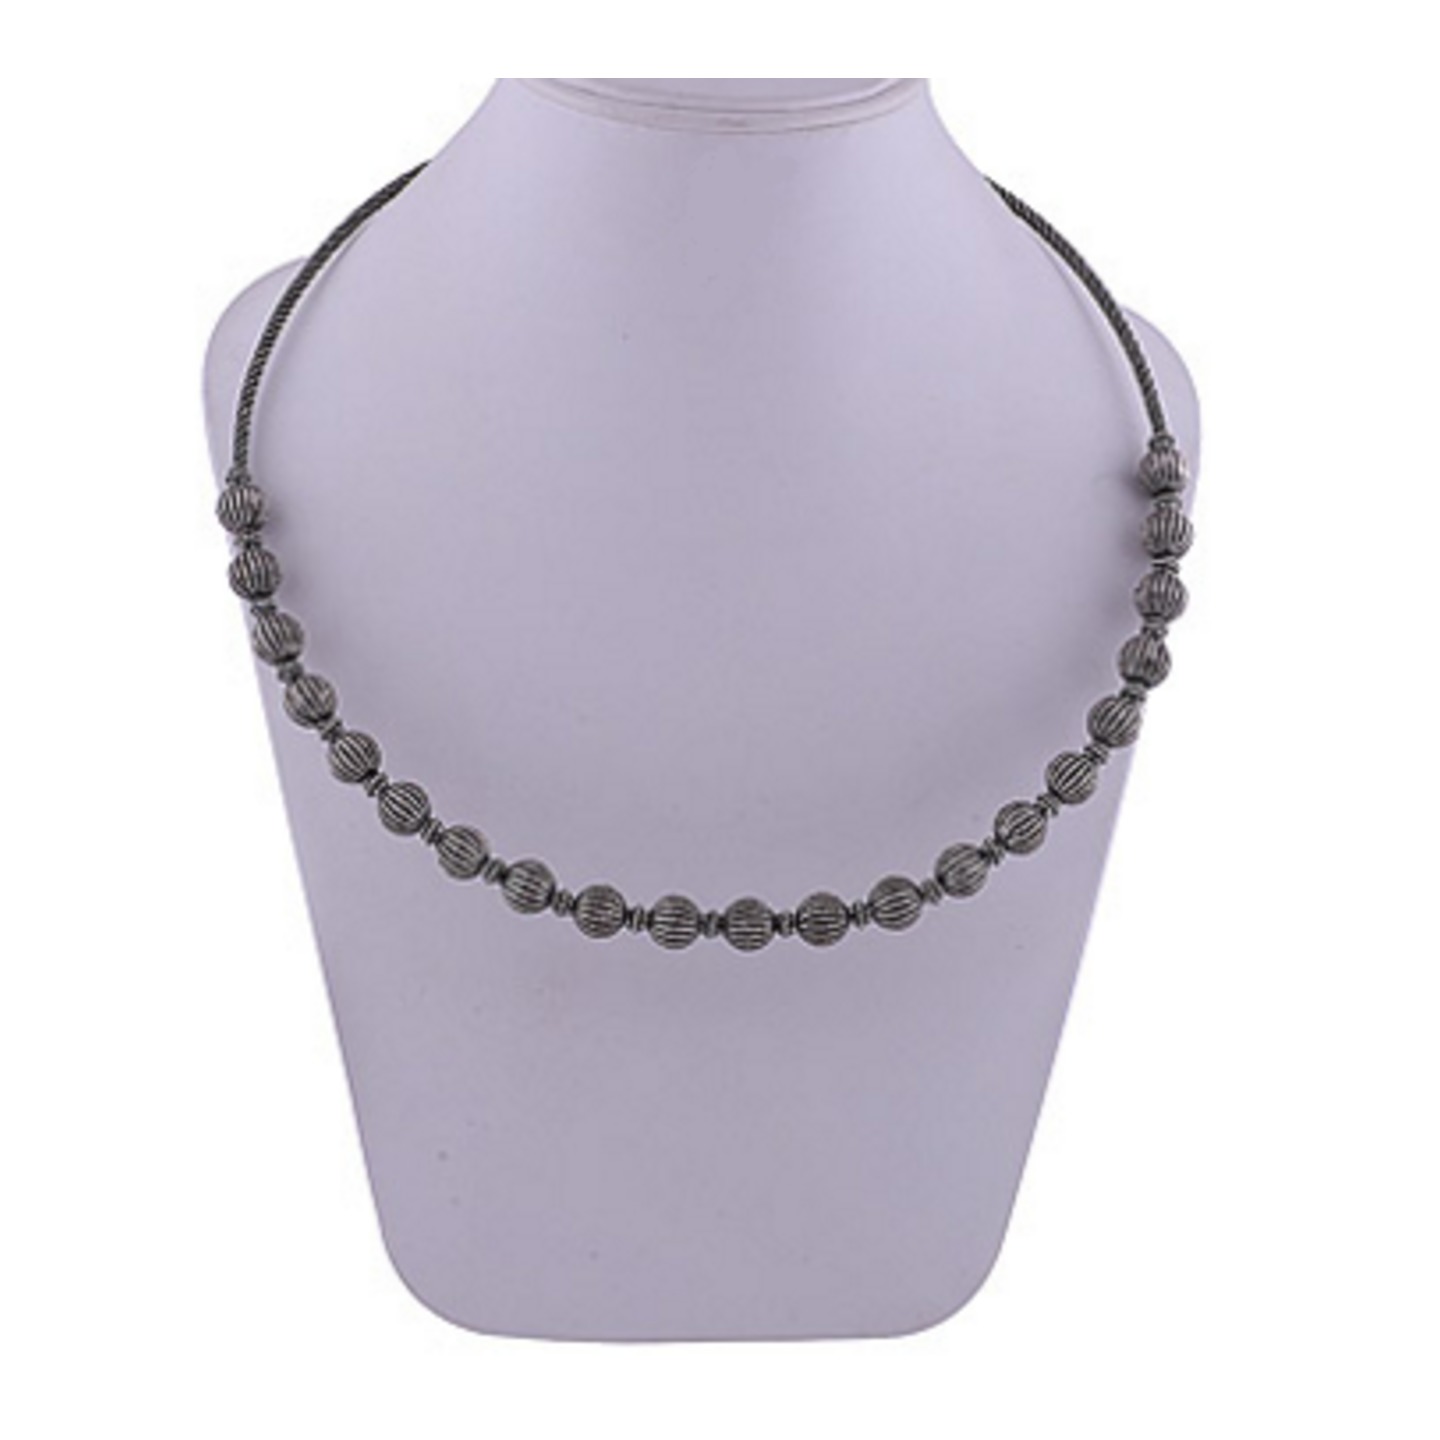 The Balls Silver Necklace